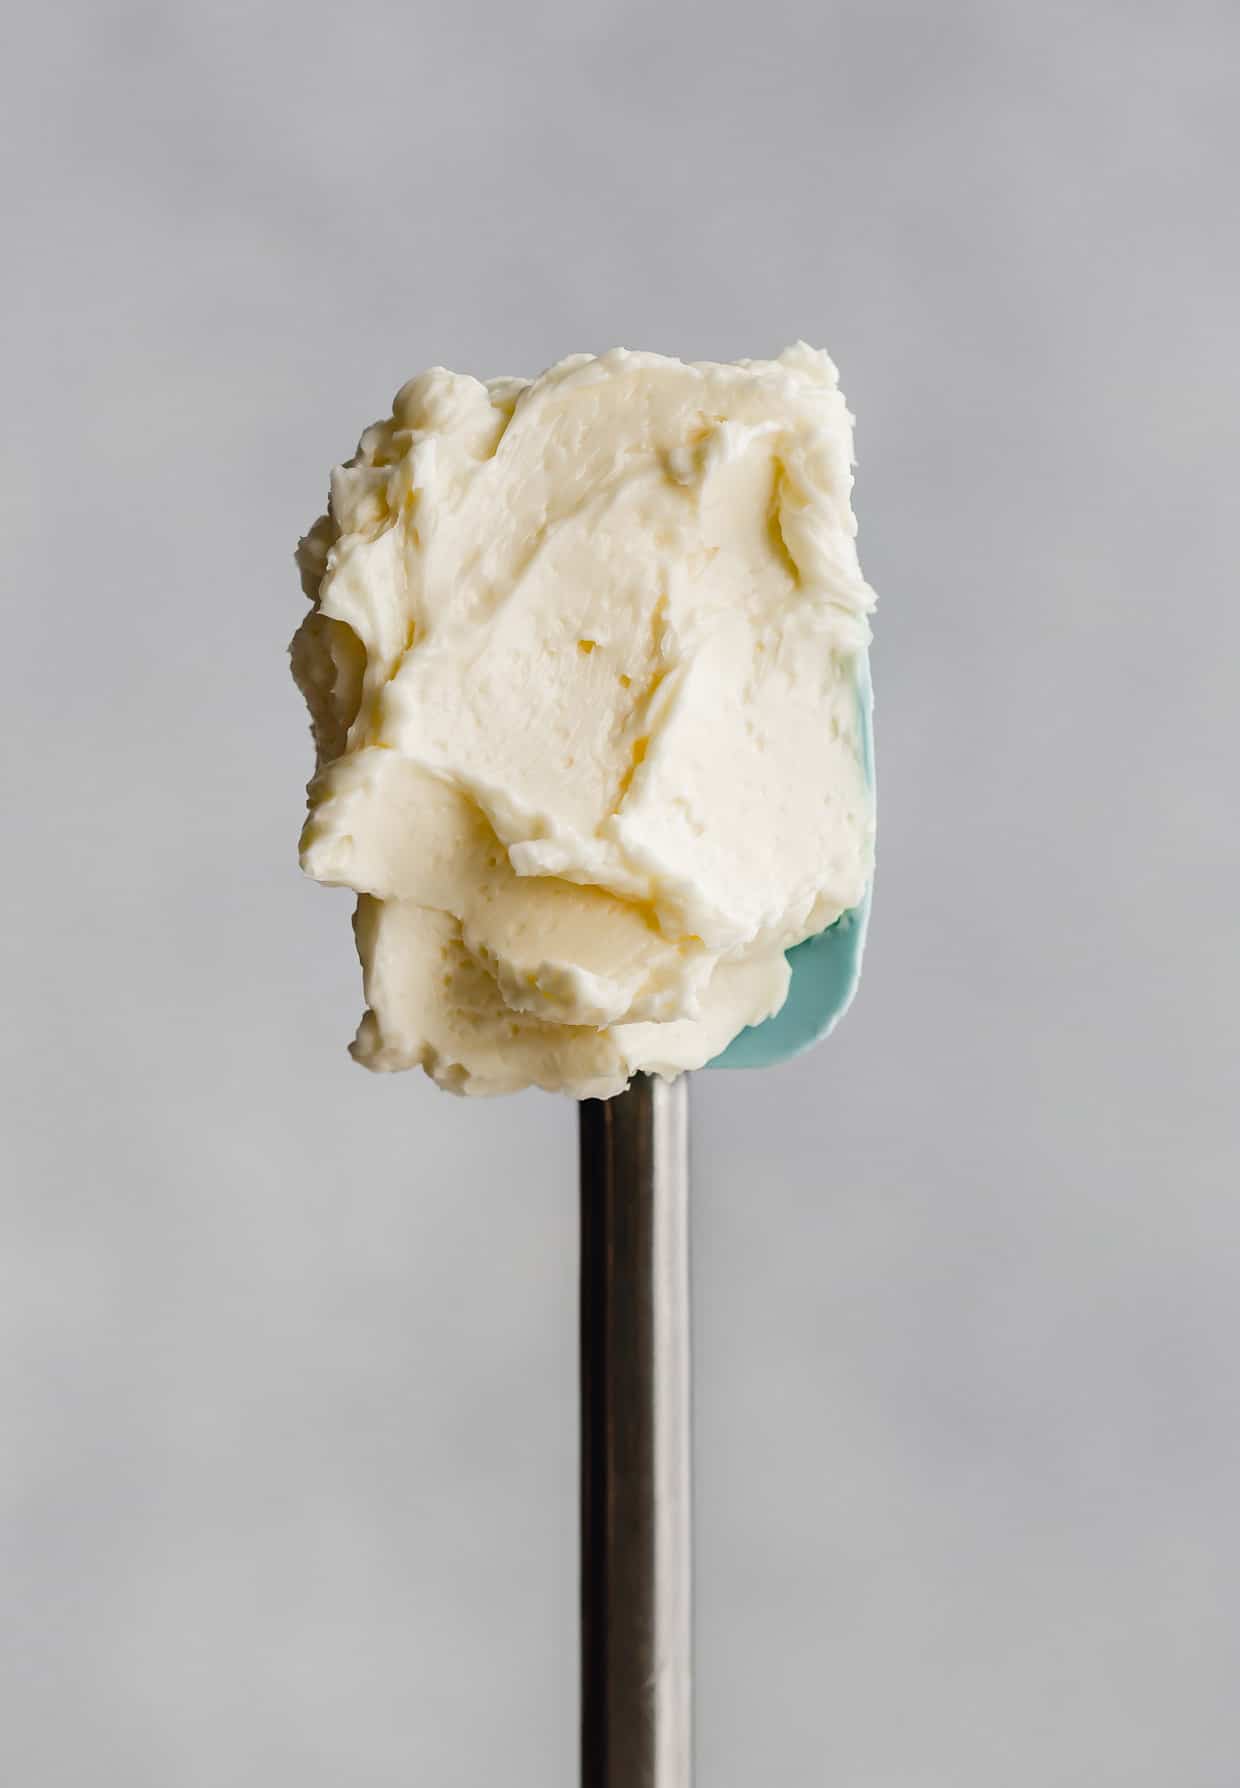 A teal rubber spatula with Swiss Meringue Buttercream on it.